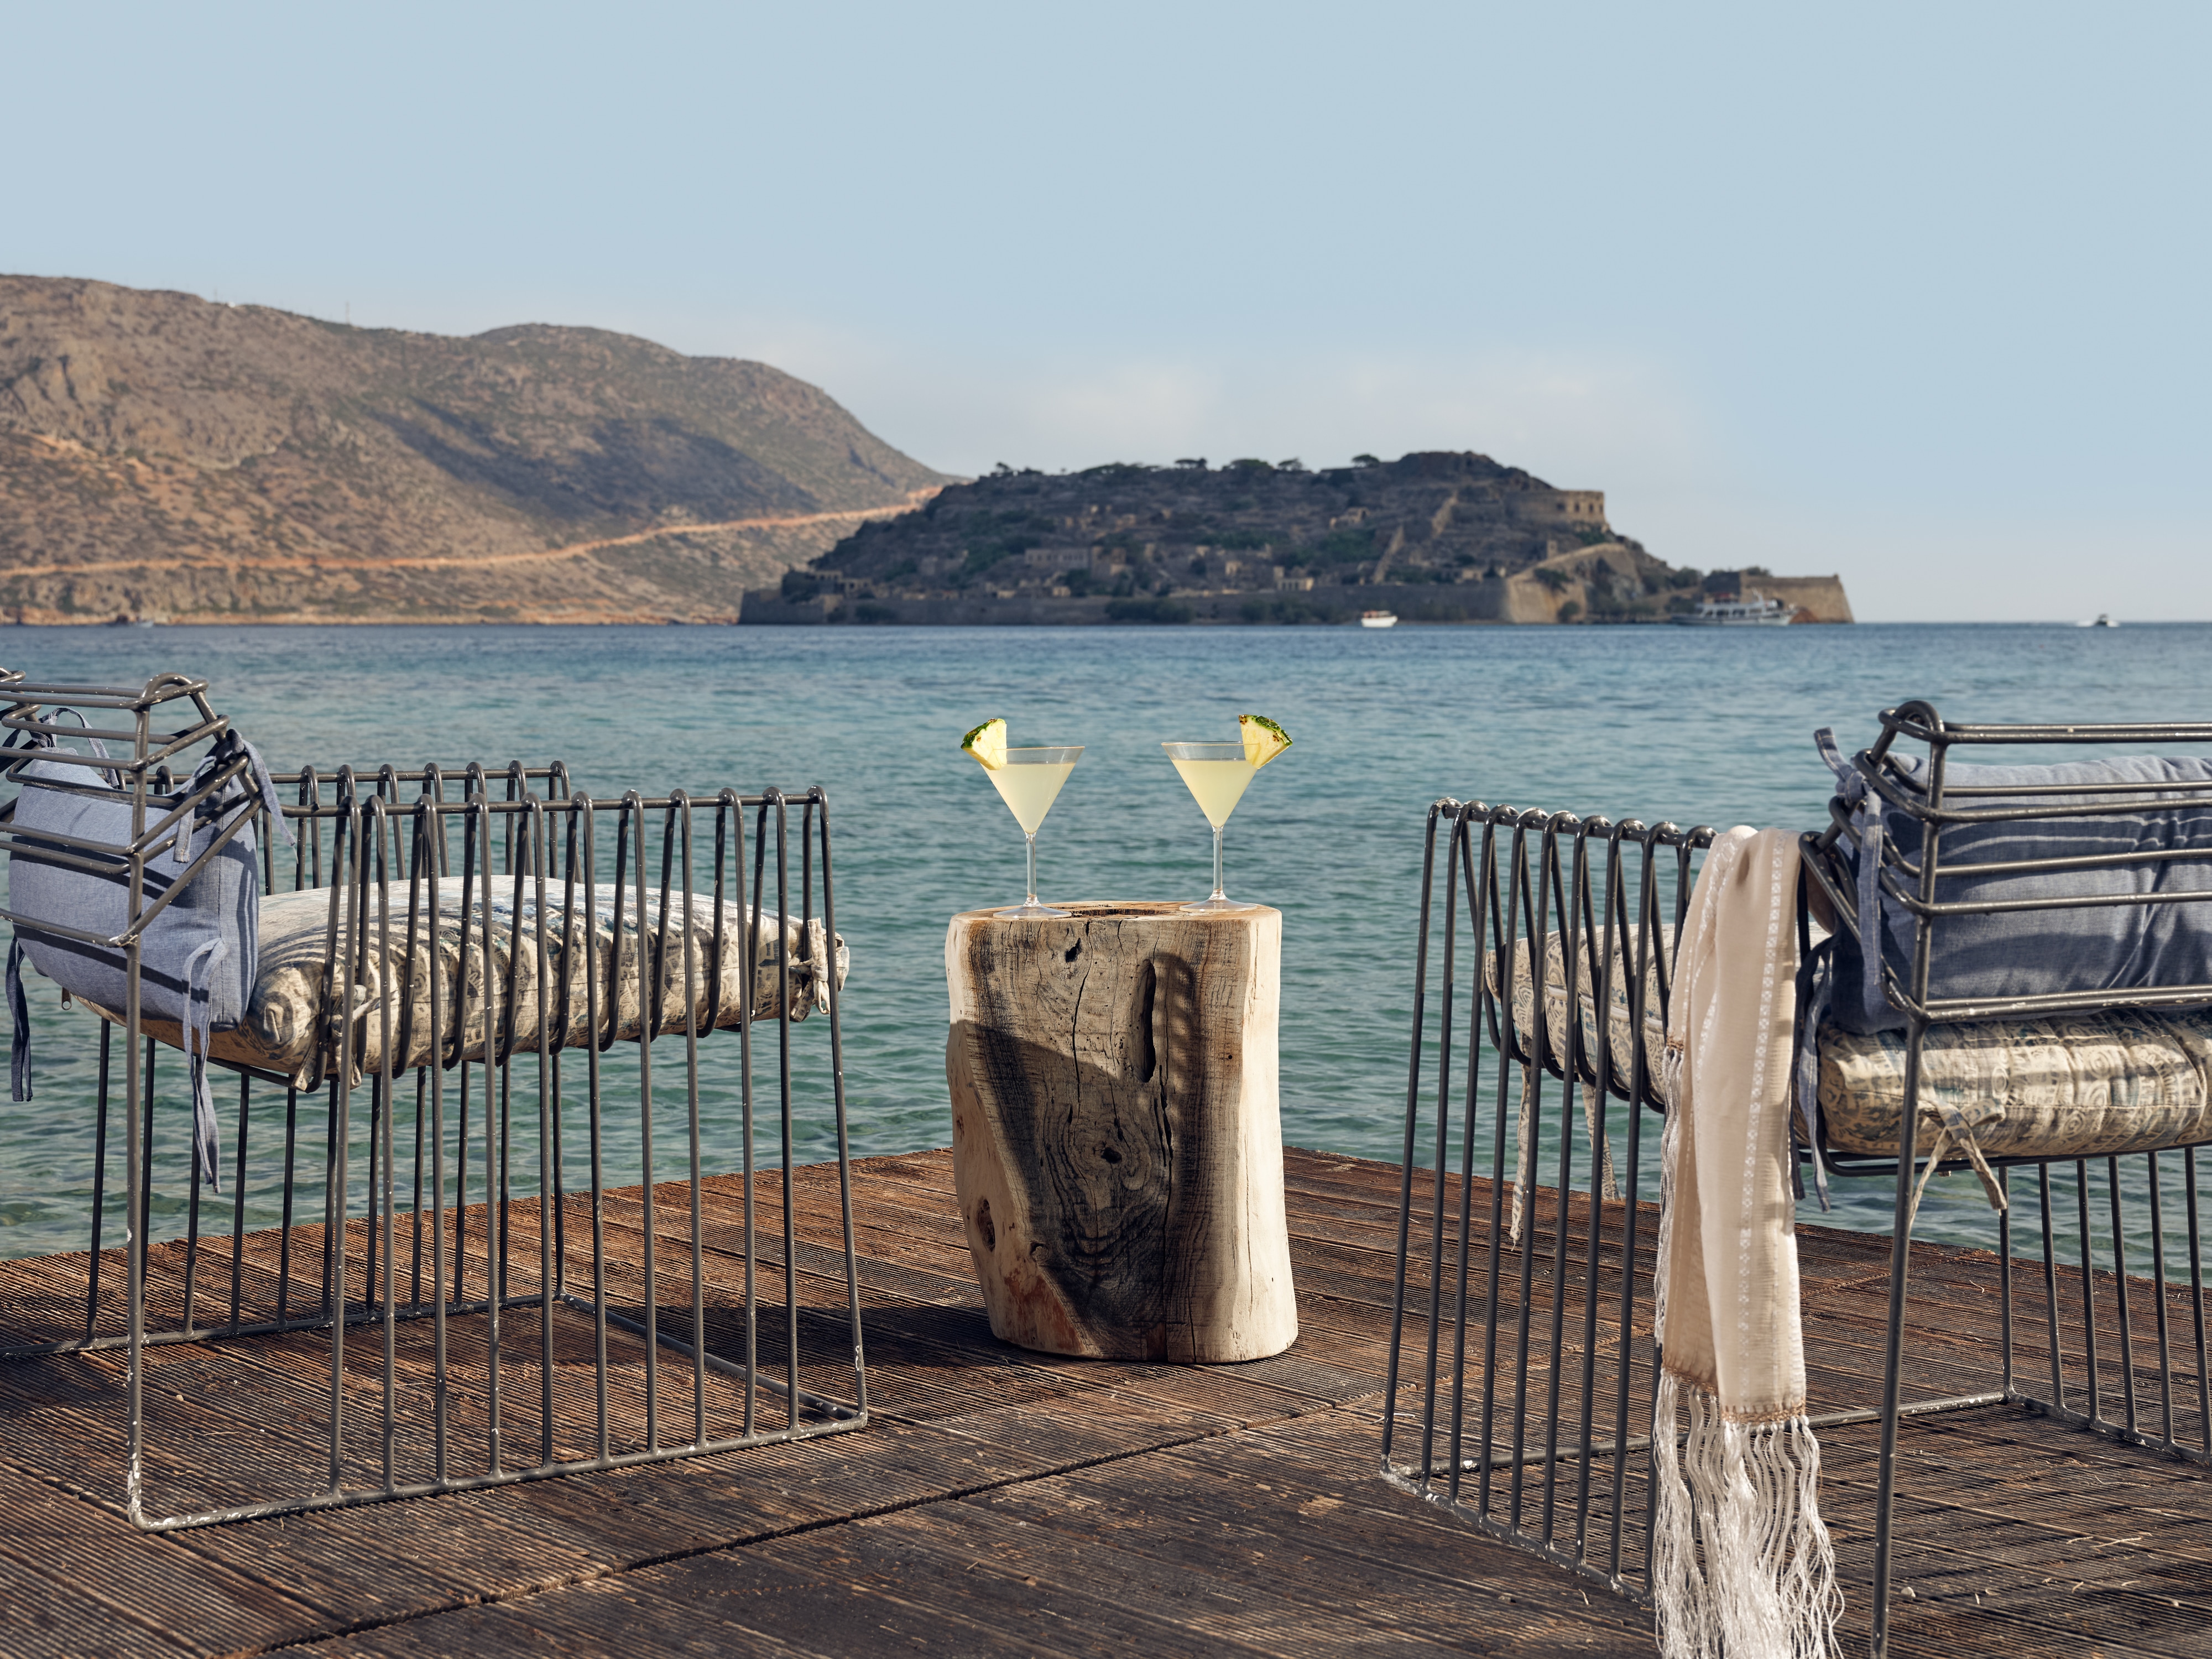 Beachside bliss: armchairs, cocktails at Domes of Elounda, Greece